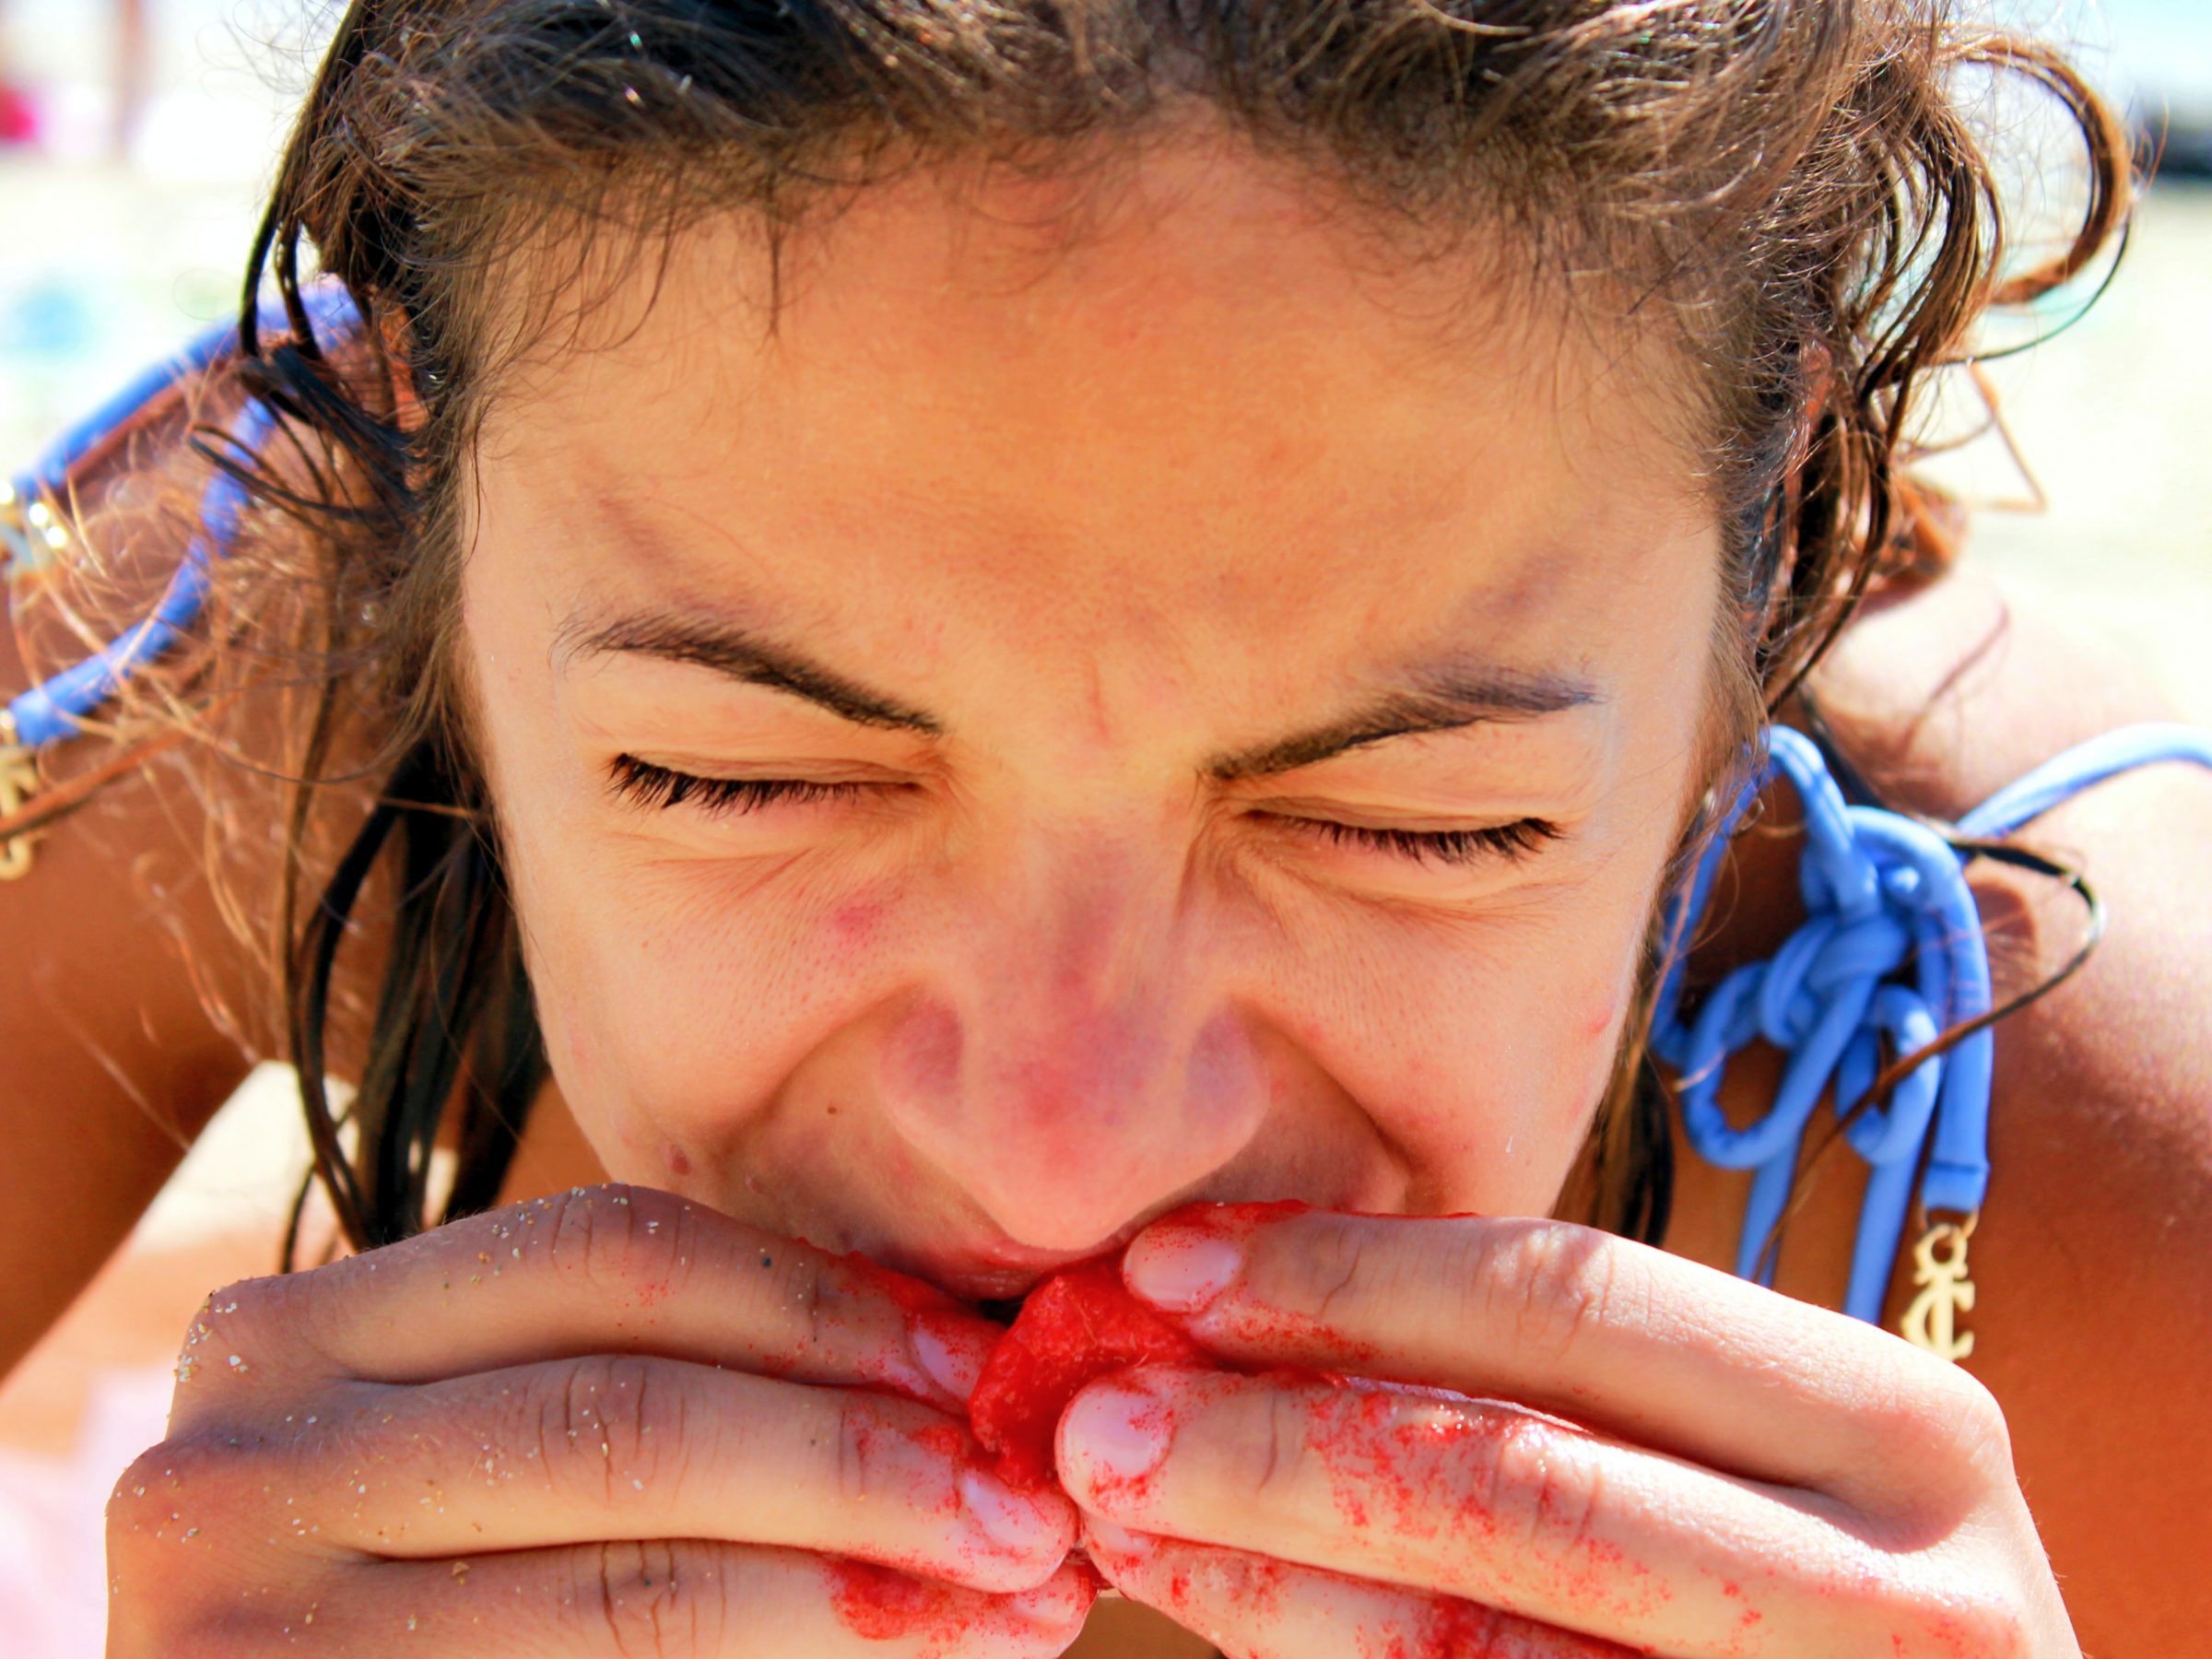 woman eating red paint